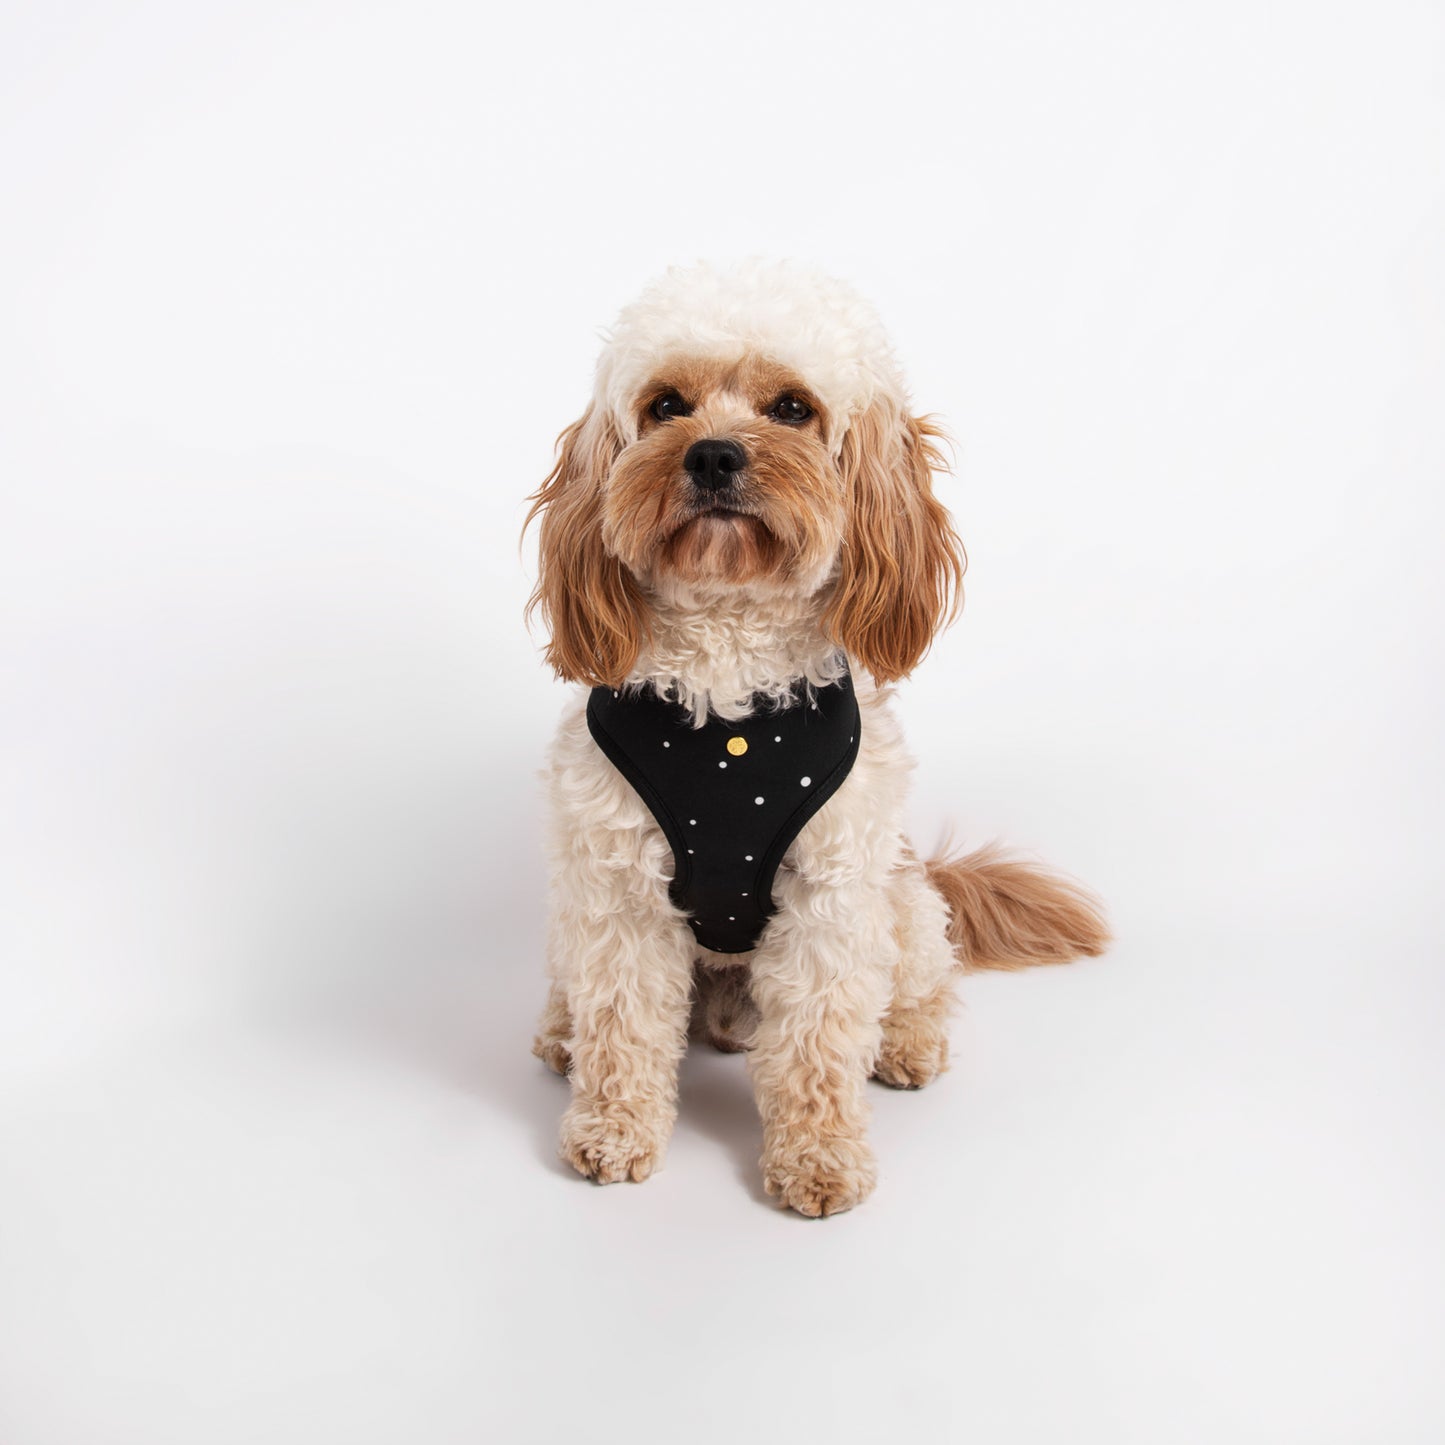 Pata Paw moo harness as seen in a medium-sized dog. Reverse design showing a timeless and chic design of hand-painted dots on a black background.